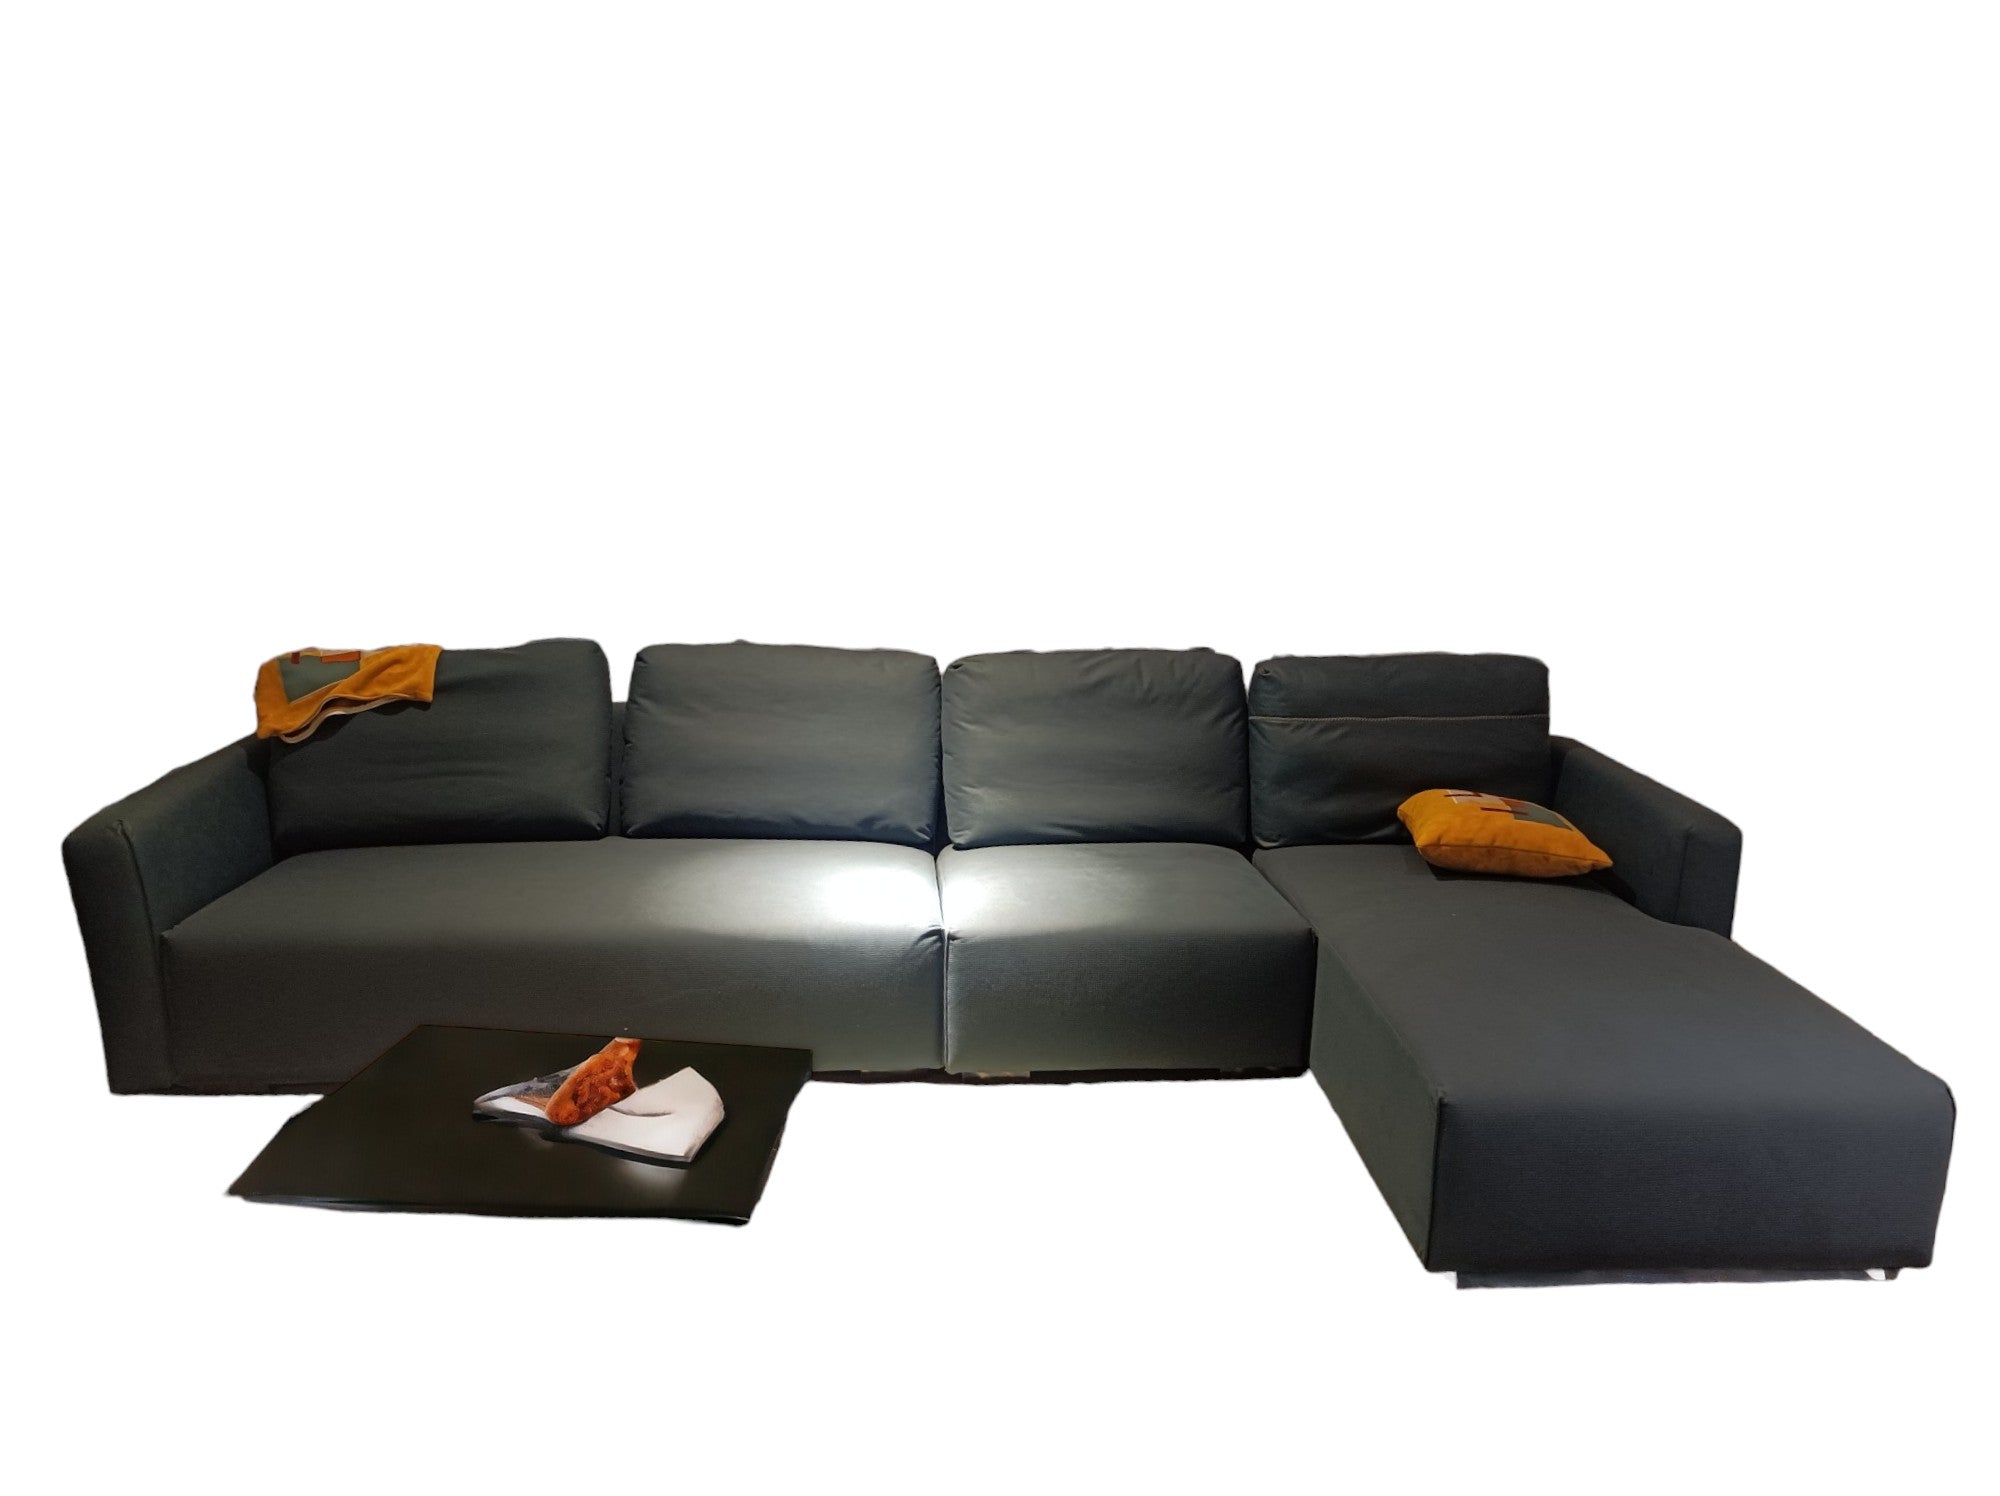 Dark Night sectional couch